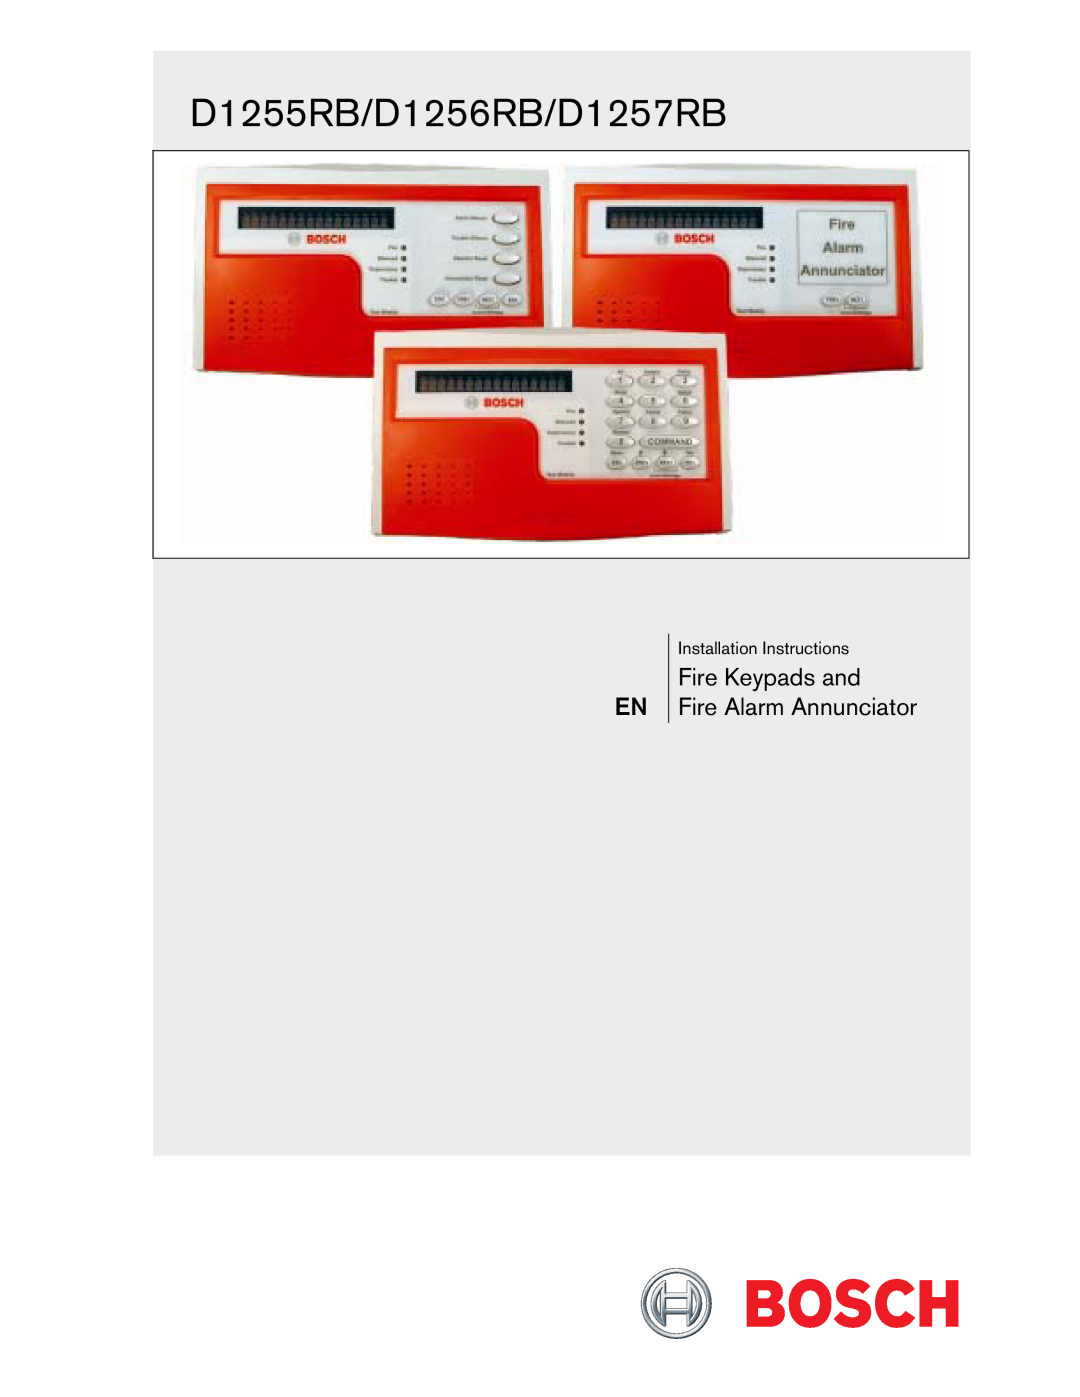 Bosch Appliances D1255RB installation instructions Fire Keypads and Fire Alarm Annunciator, Installation Instructions 